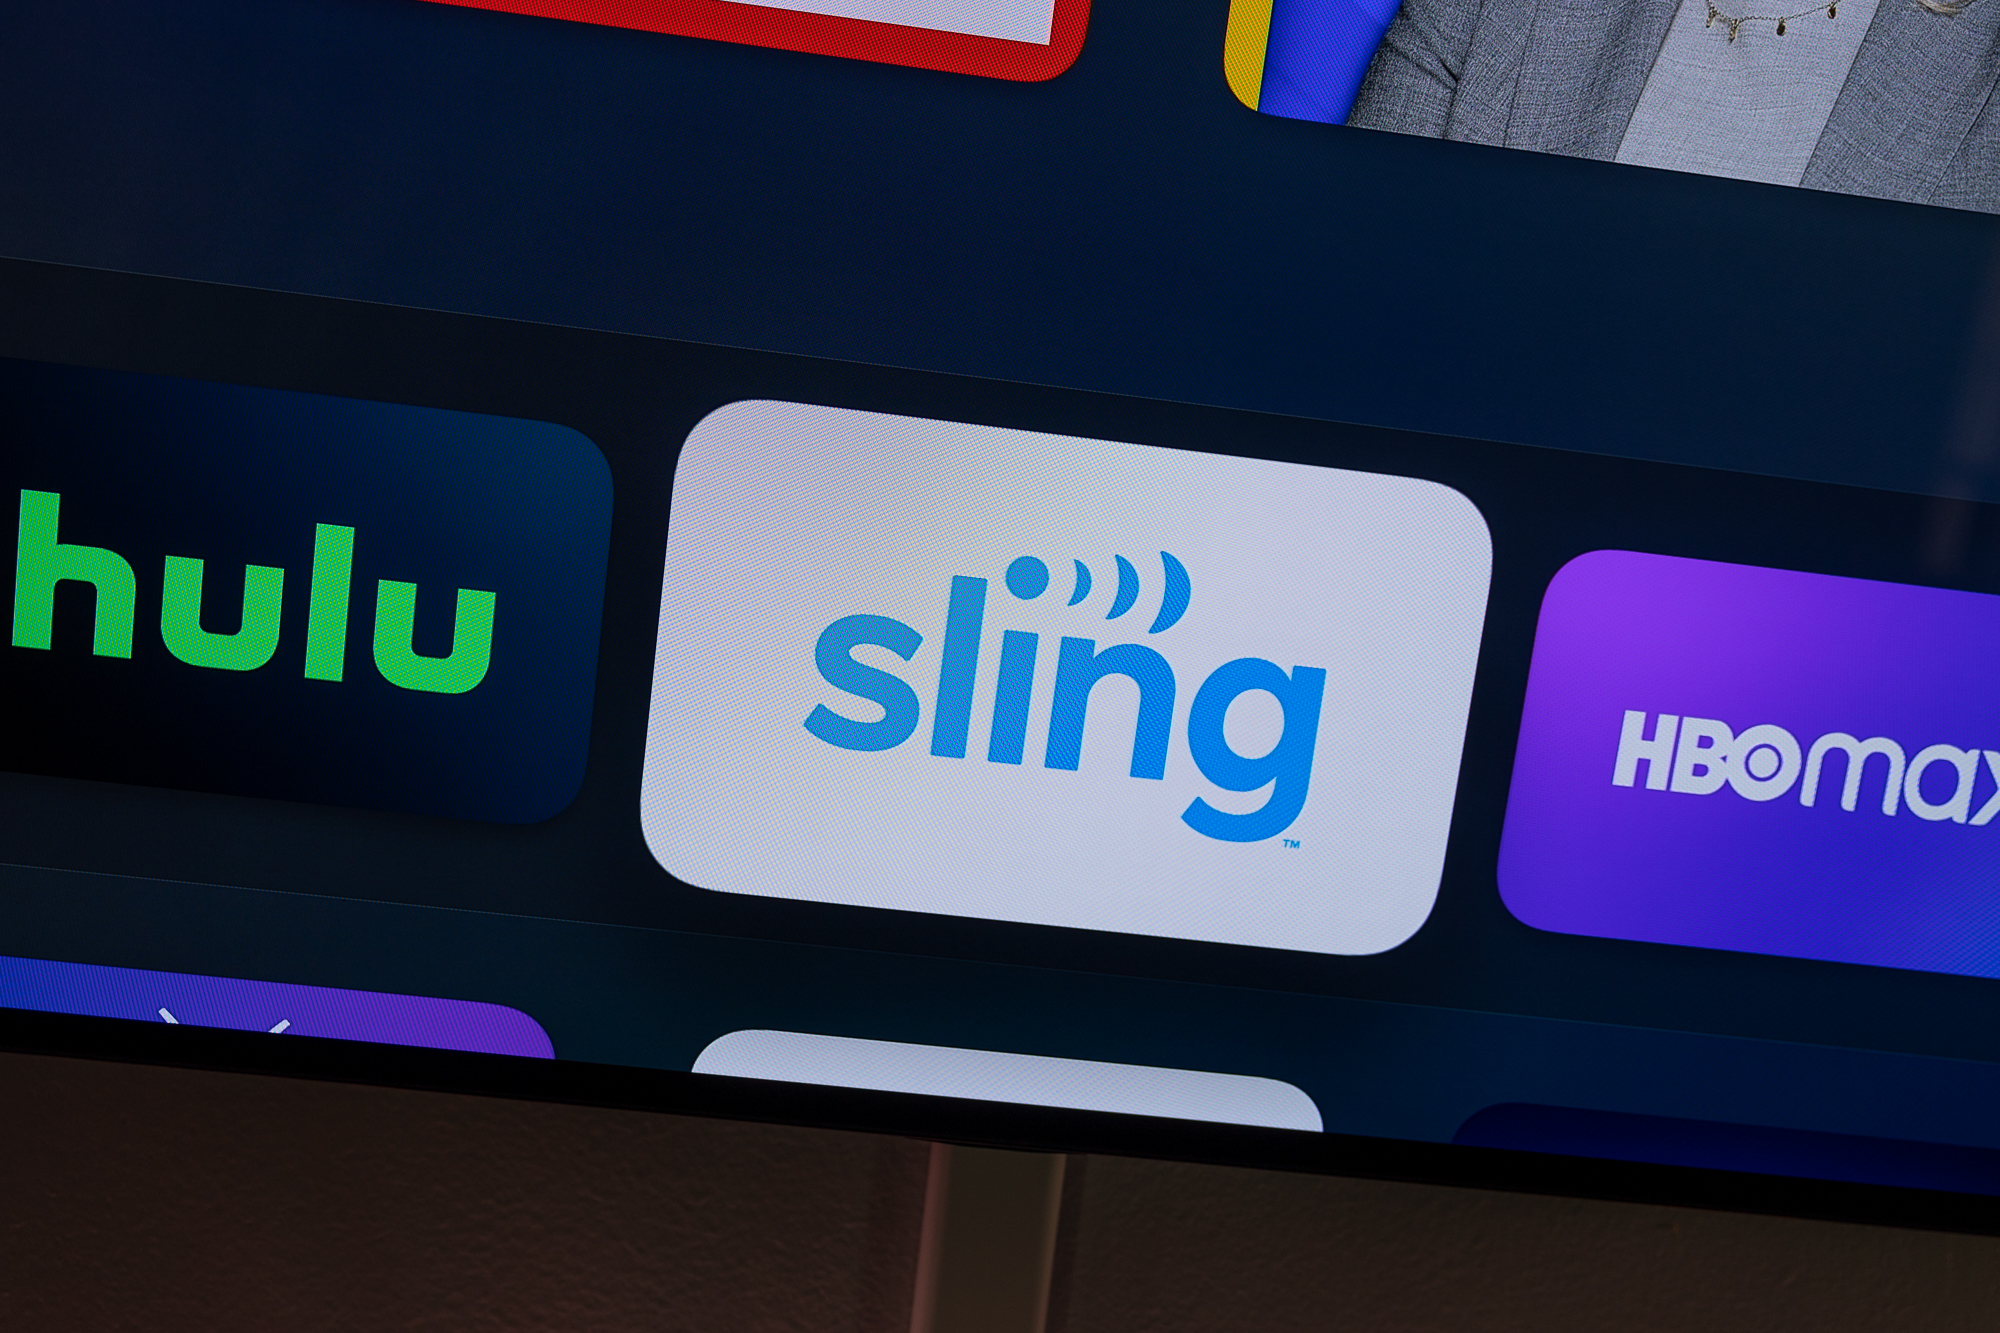 Streaming services guide: Here's how to choose what's right for